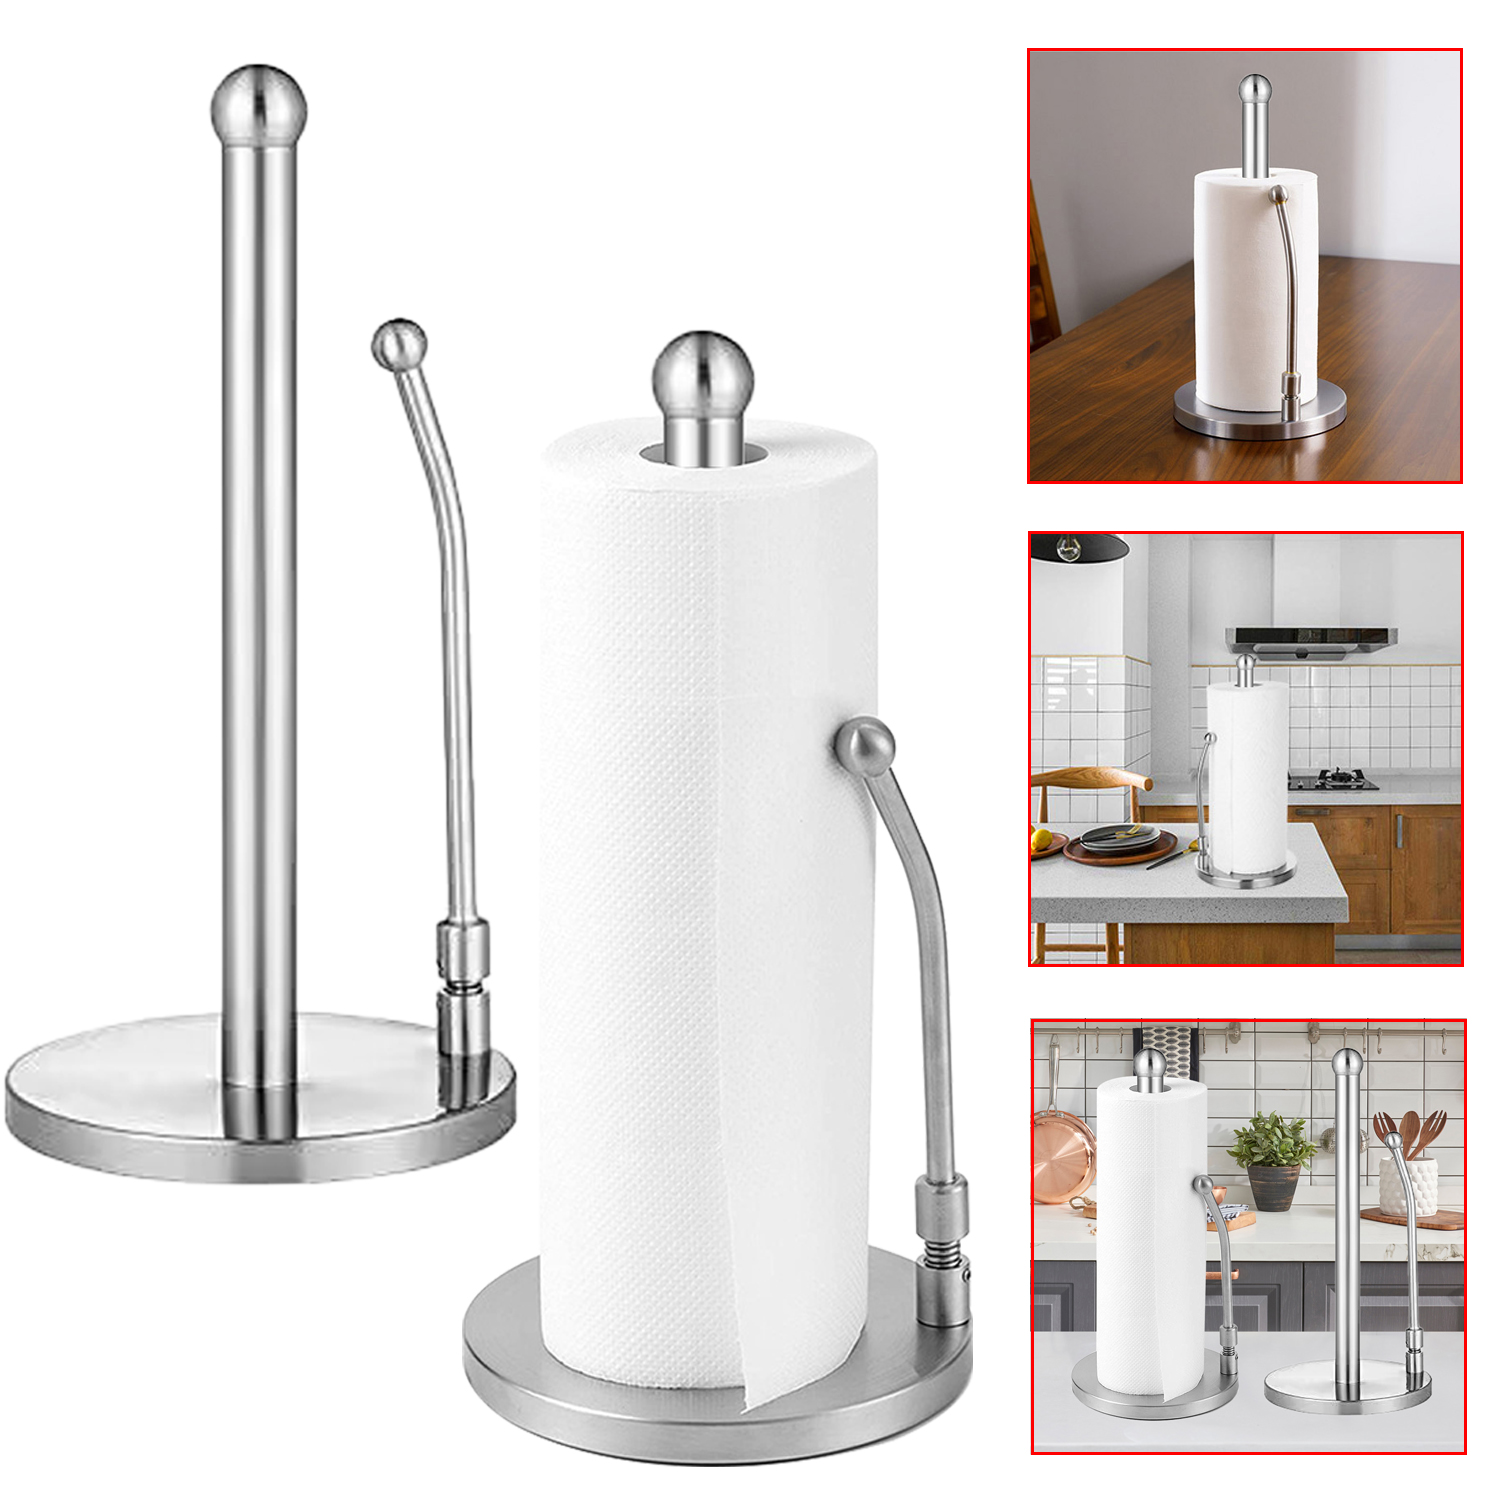 Stainless Steel Vertical Paper Towel Holder Stand For Home Kitchen Countertop Living Room Napkins Paper Roll Holder Storage Rack